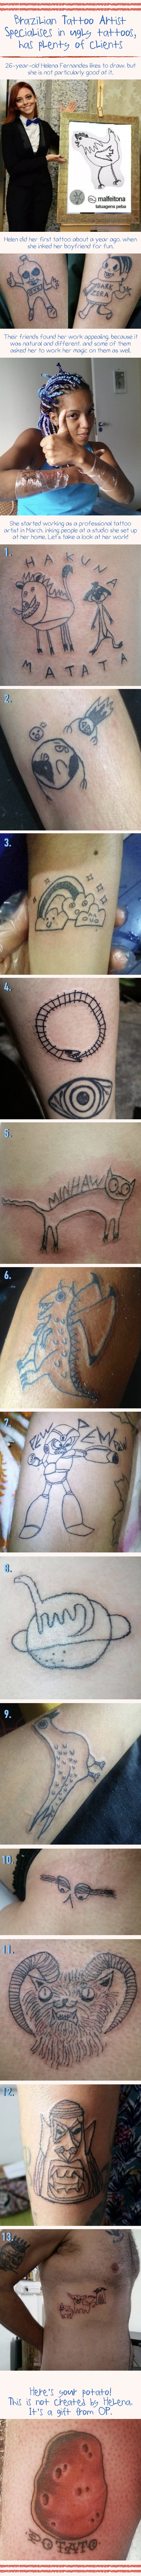 This Brazilian Girl Is Good At Inking People With Ugly Tattoos